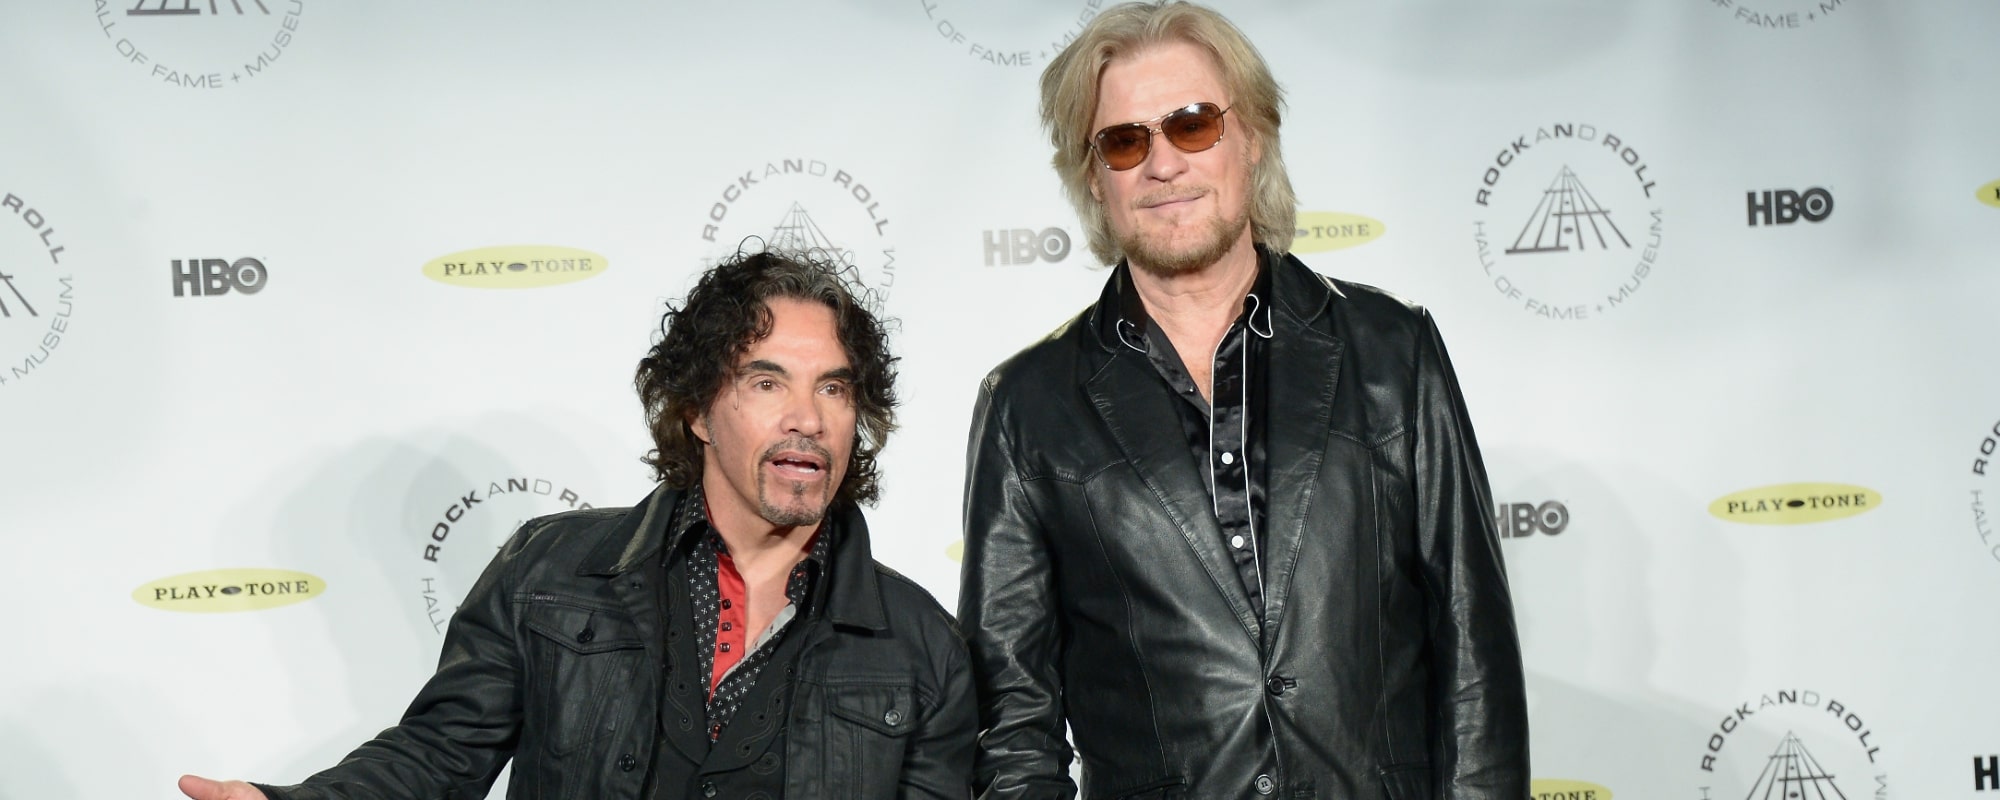 Nashville Judge Rules on Hall & Oates Lawsuit, Temporarily Bars Oates from Selling Shares of Joint Venture